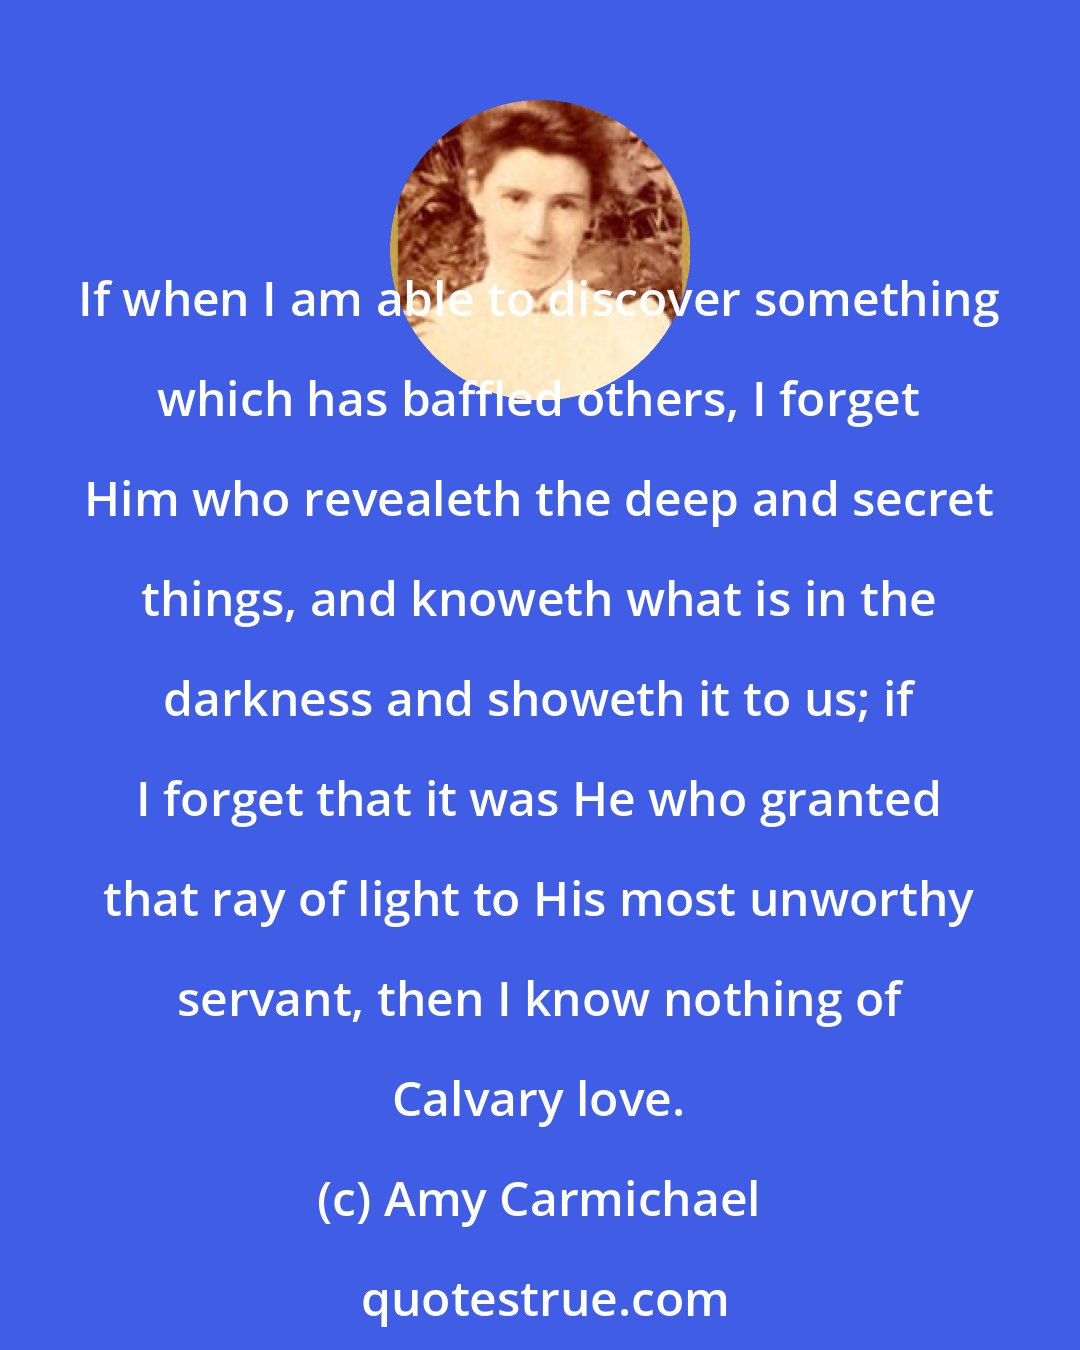 Amy Carmichael: If when I am able to discover something which has baffled others, I forget Him who revealeth the deep and secret things, and knoweth what is in the darkness and showeth it to us; if I forget that it was He who granted that ray of light to His most unworthy servant, then I know nothing of Calvary love.